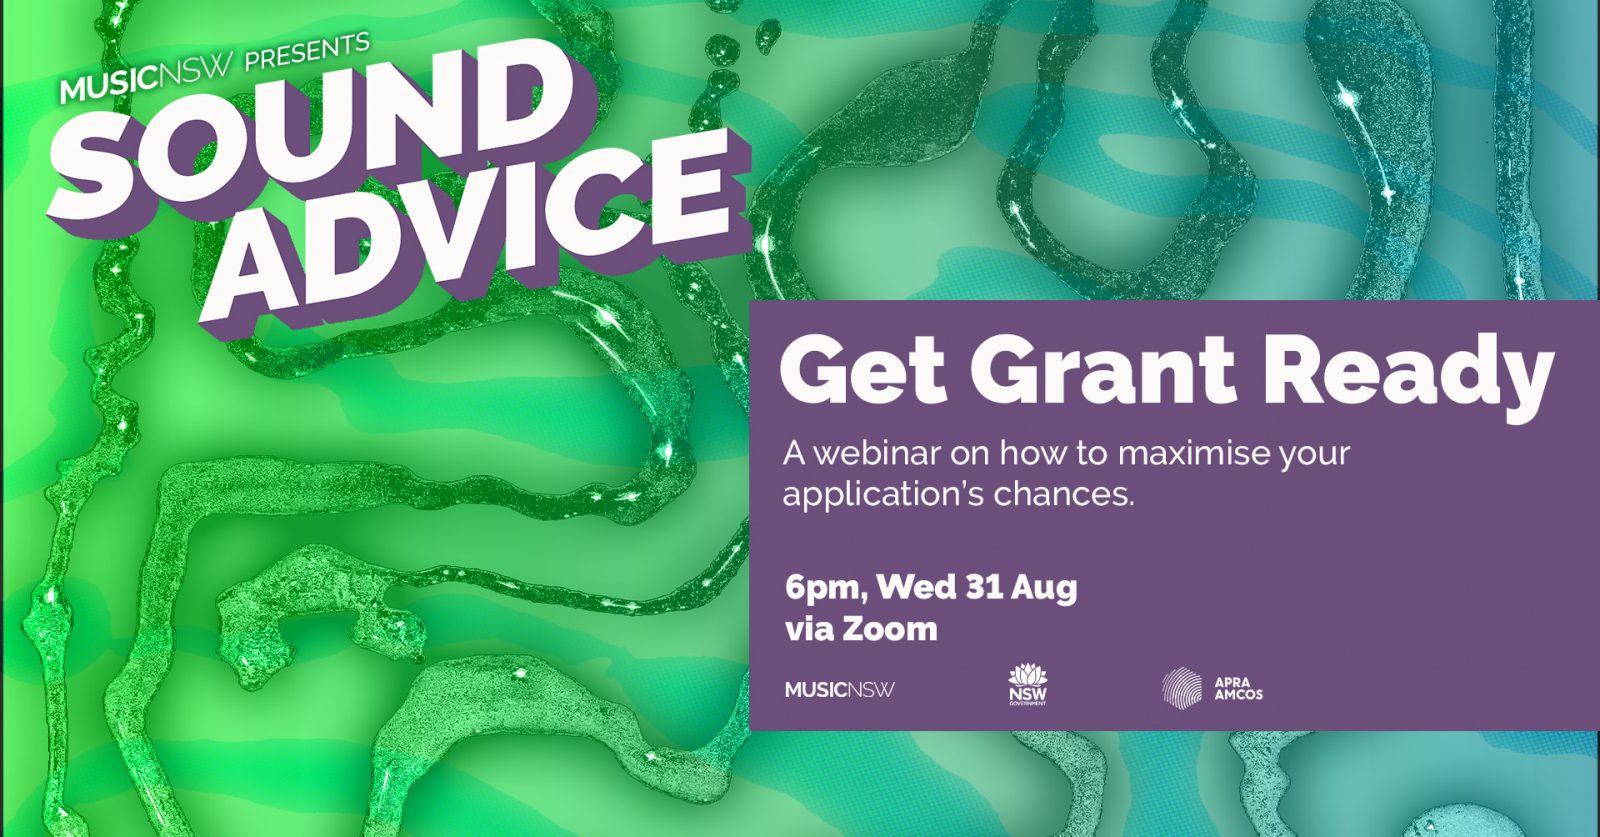 Sound Advice Banner for Grant Writing webinar. Event details on a purple background all on a colourful swirling background.